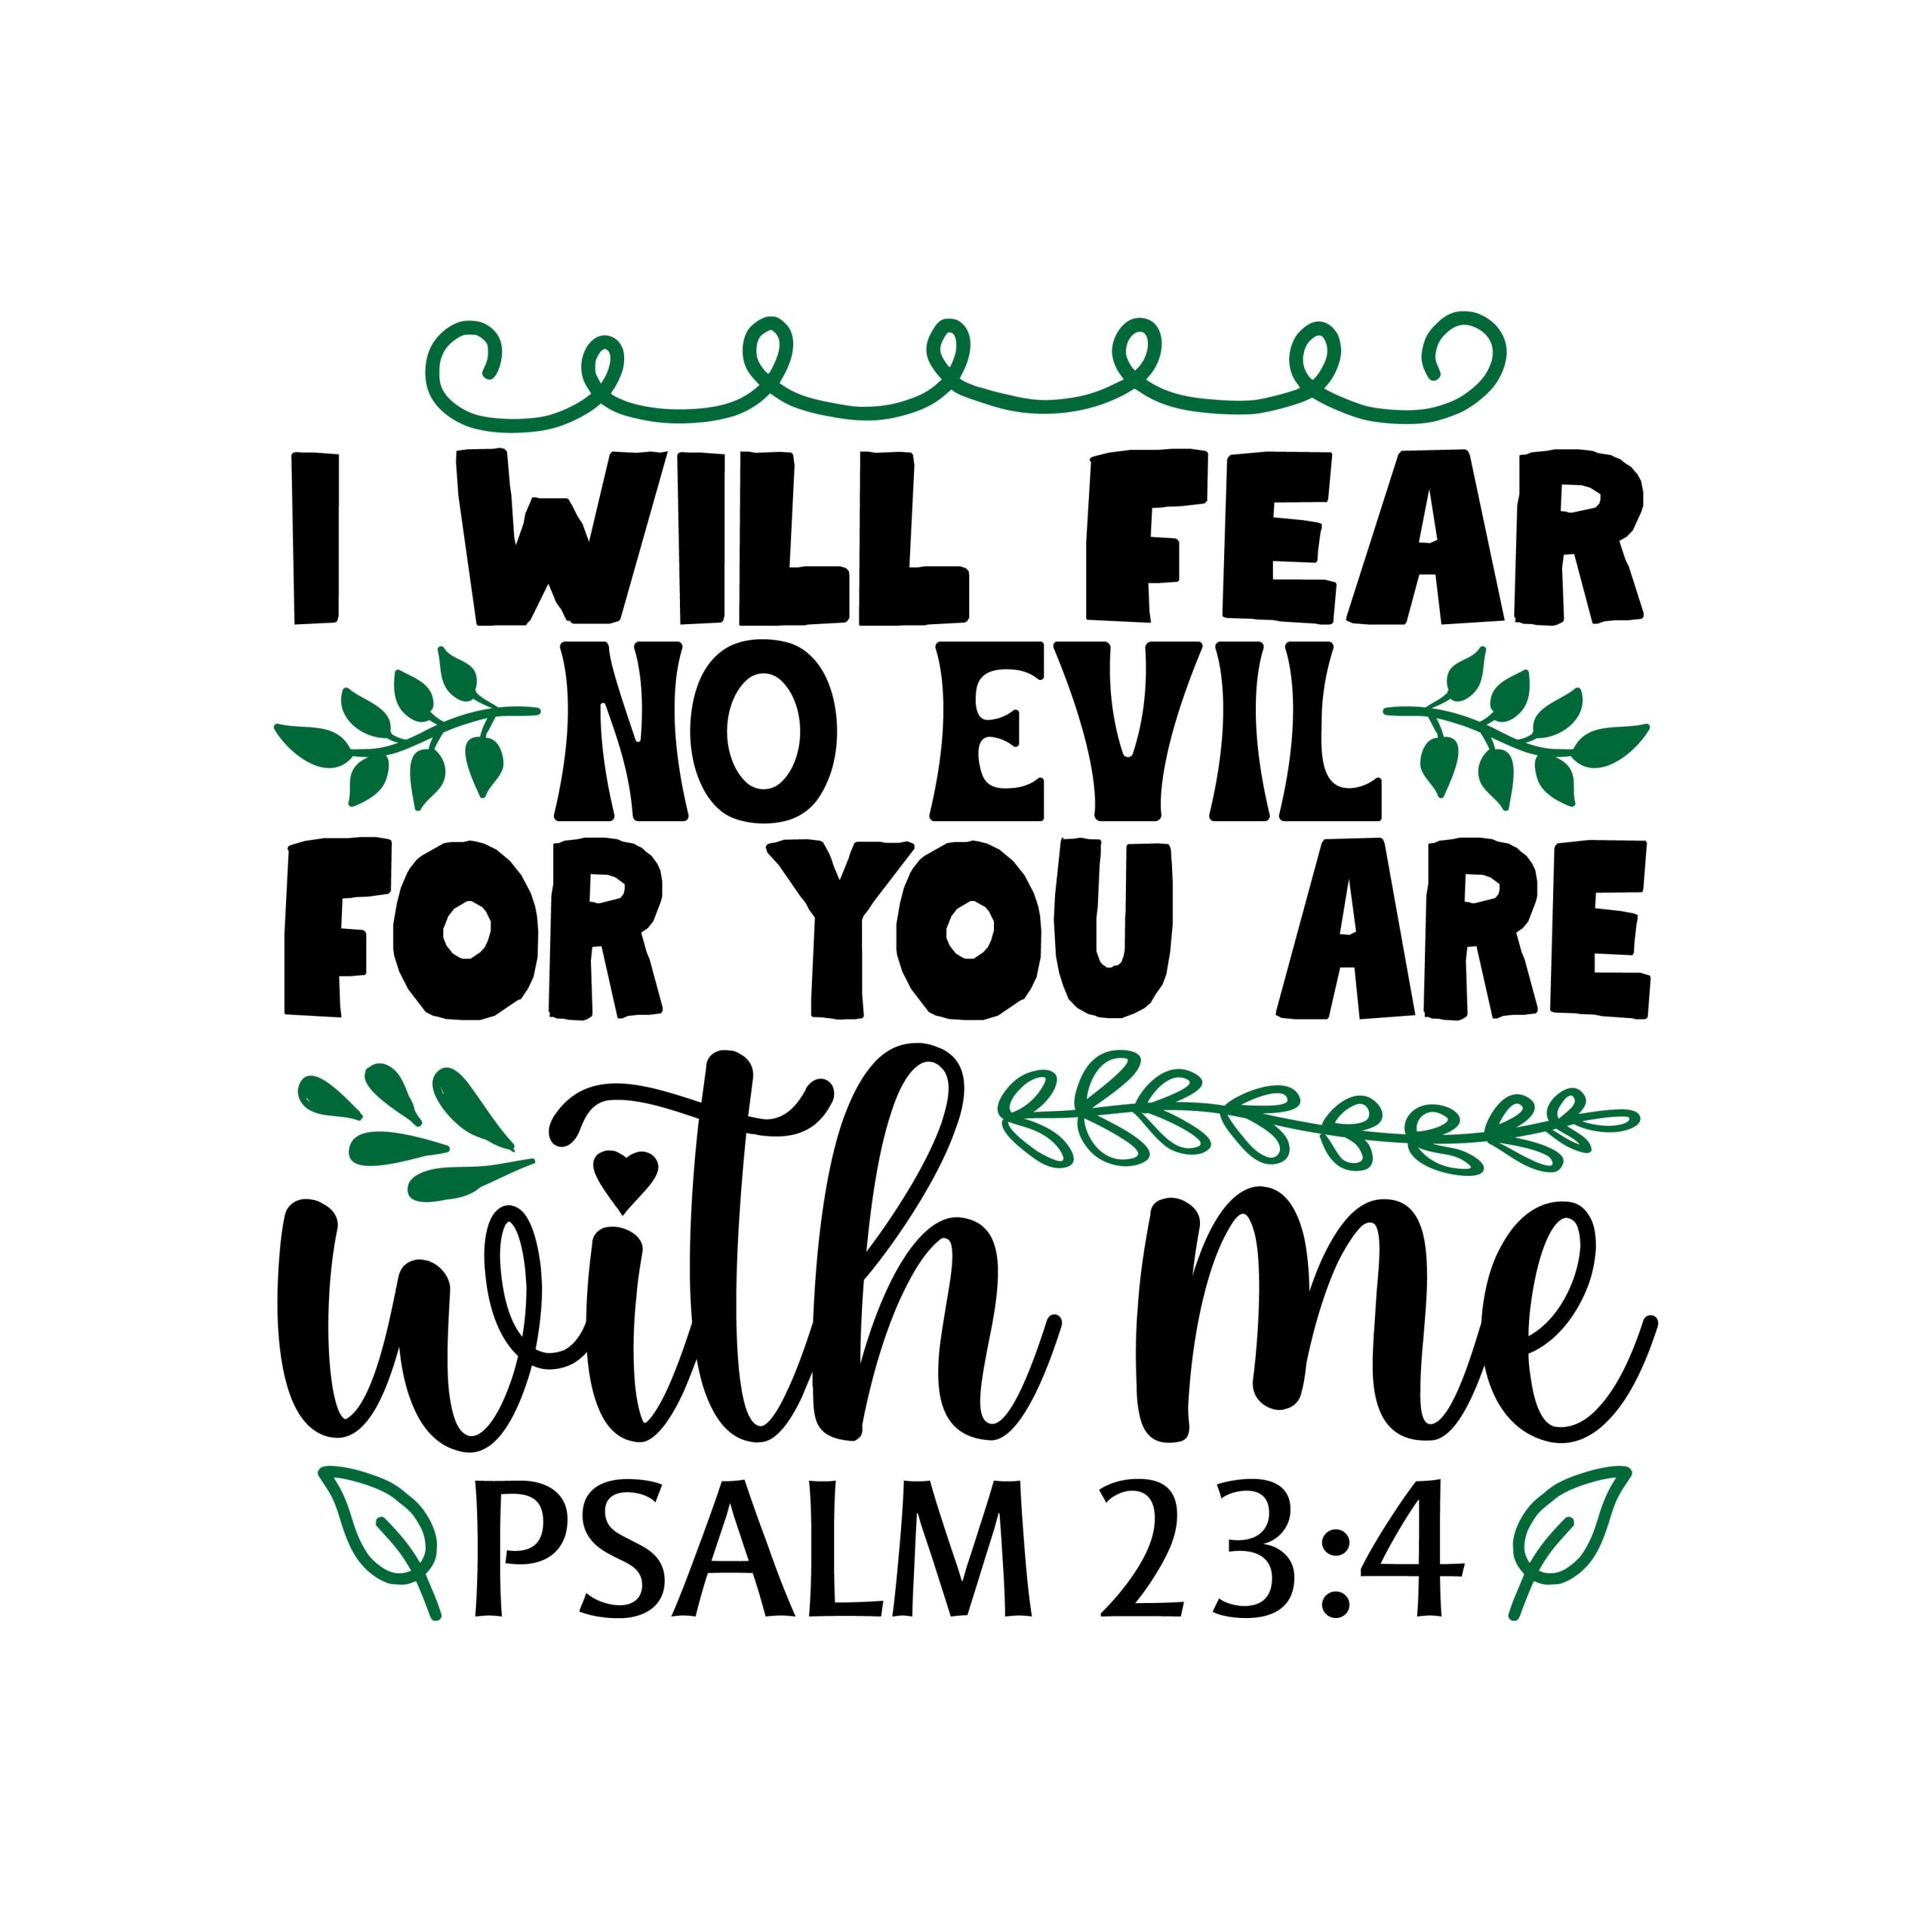 I will fear no evil for you are with me Psalm 23:4, bible verses, scripture verses, svg files, passages, sayings, cricut designs, silhouette, embroidery, bundle, free cut files, design space, vector